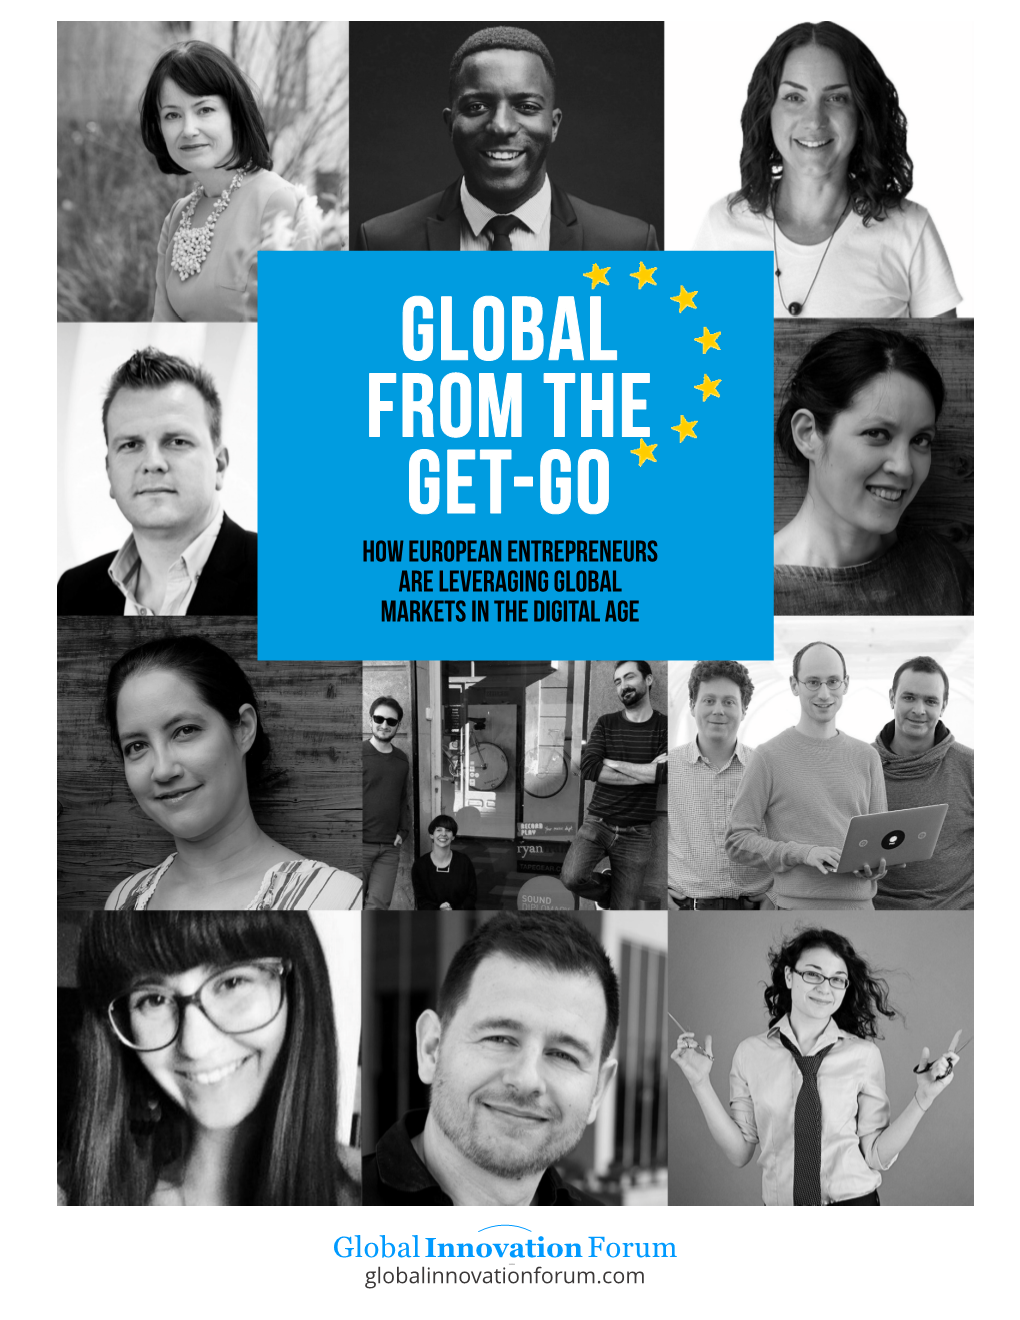 GLOBAL from the GET-GO How European Entrepreneurs Are Leveraging Global Markets in the Digital Age